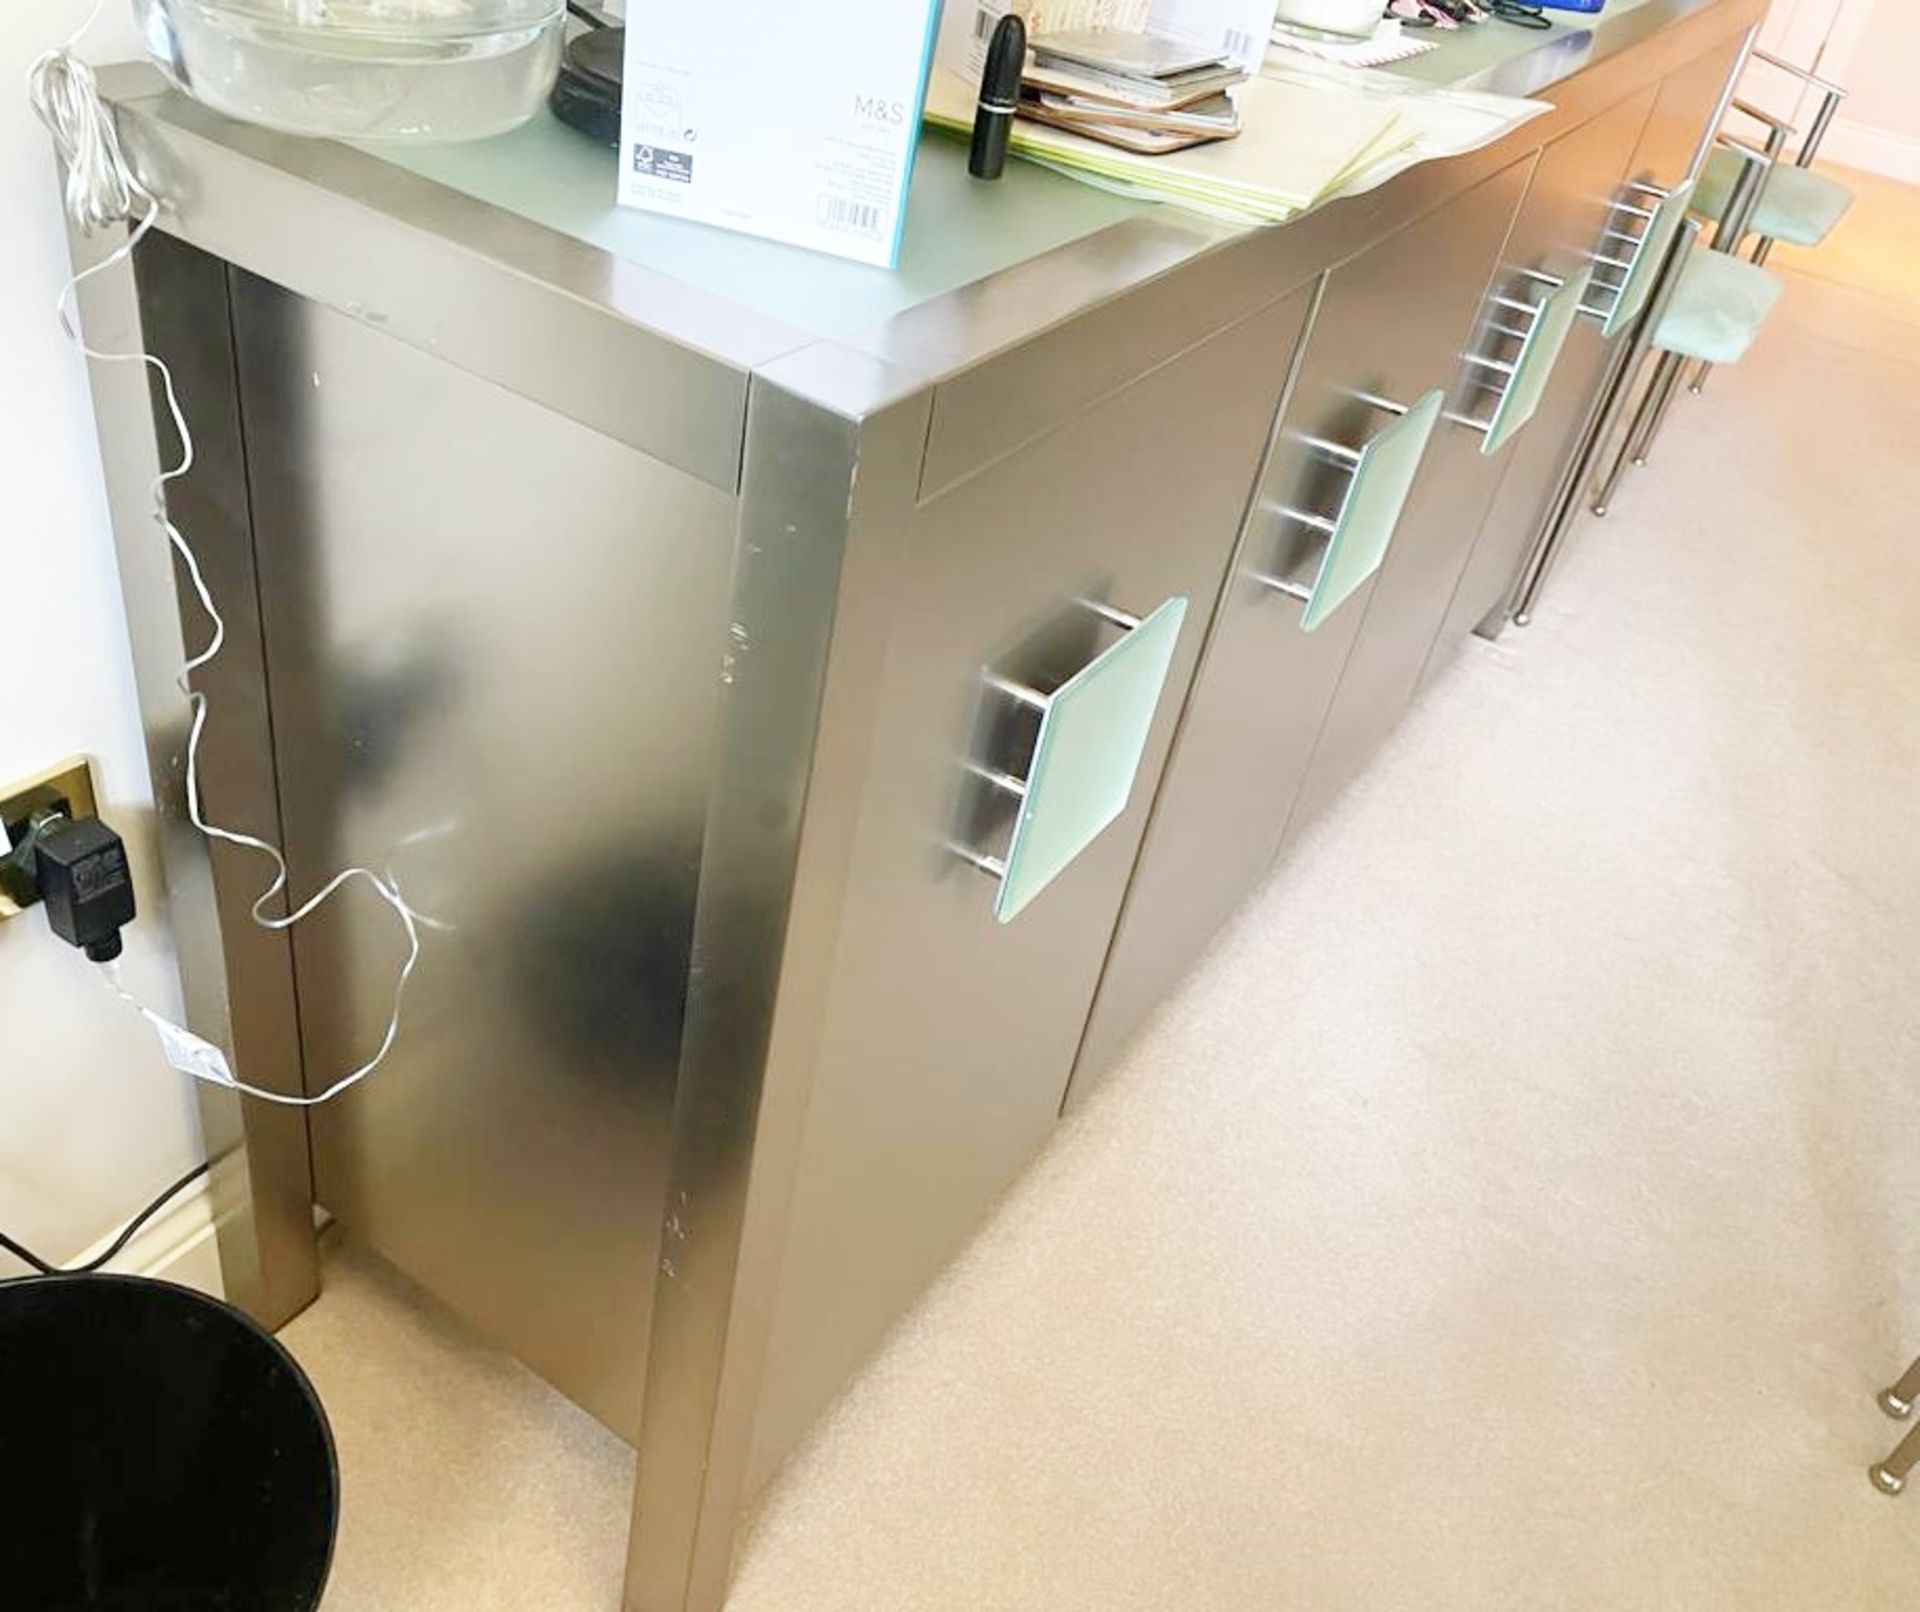 1 x Contemporary Sideboard With a Brushed Metal Exterior and Smoked Glass Top Insert and Door - Image 6 of 9